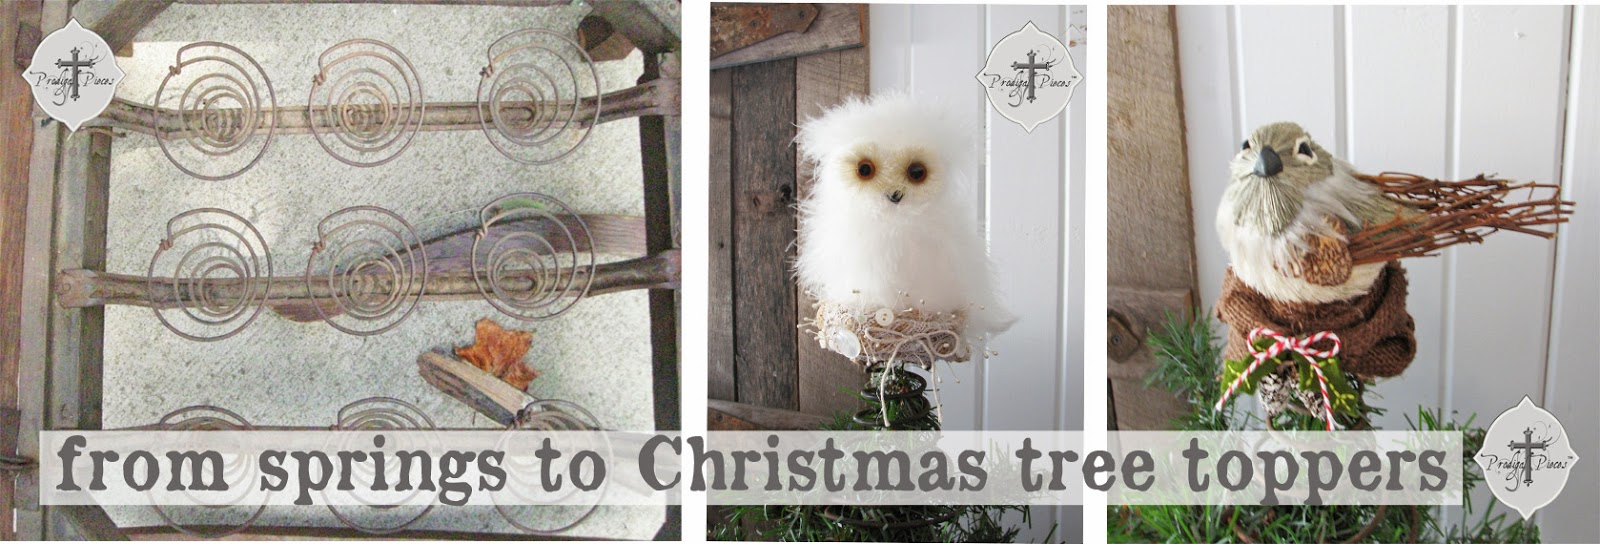 Repurposed Christmas Tree Topper from Rocking Chair Parts | Prodigal Pieces | prodigalpieces.com #prodigalpieces